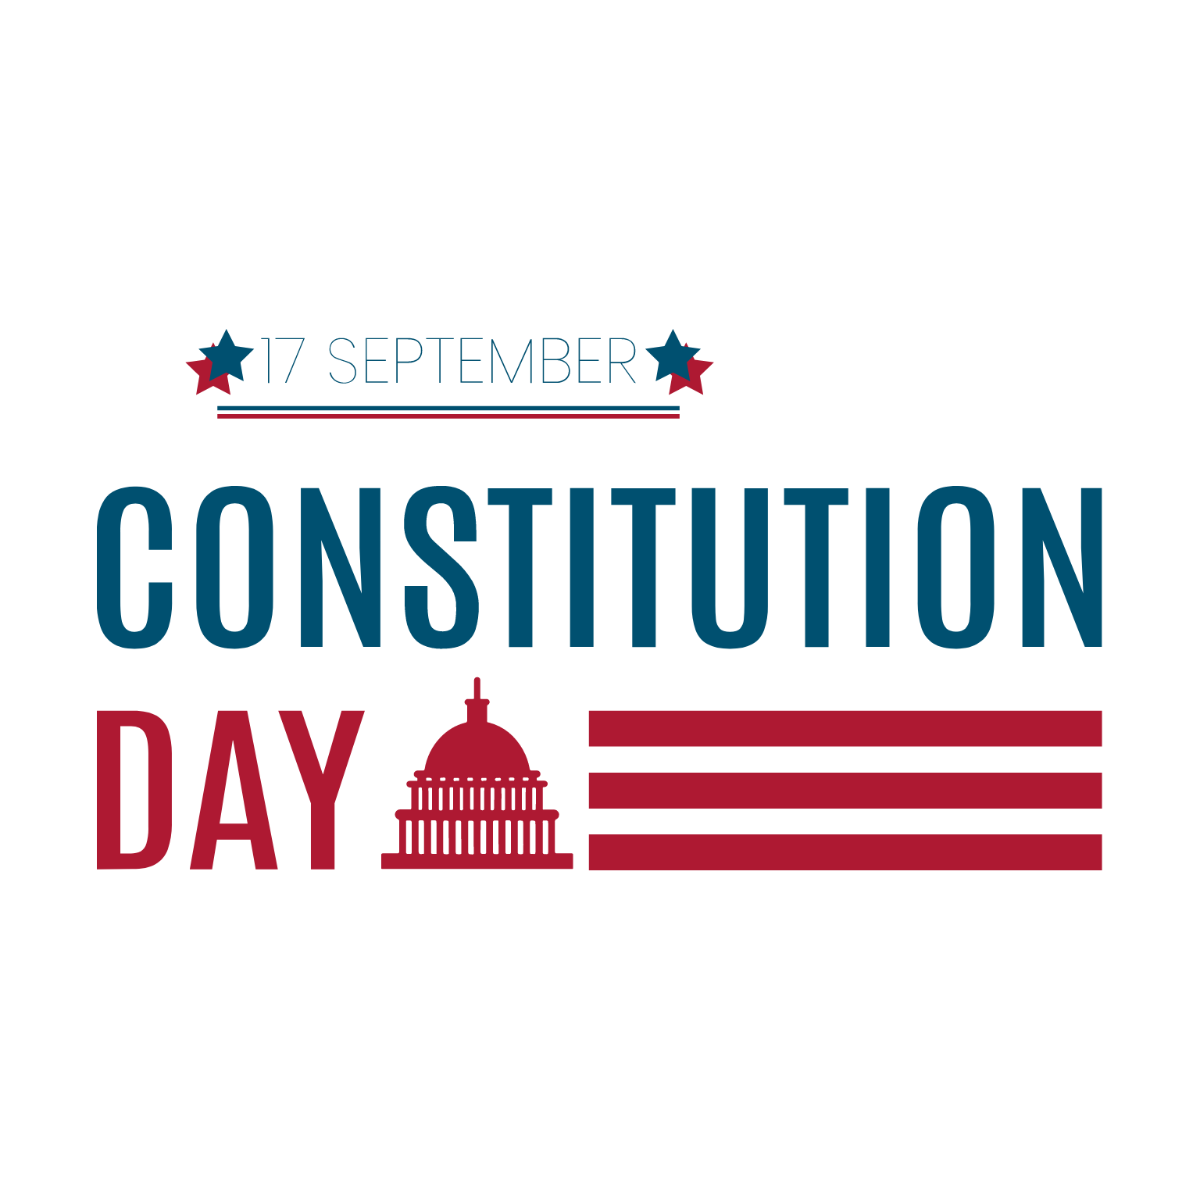 Free Constitution and Citizenship Day Clip Art Template